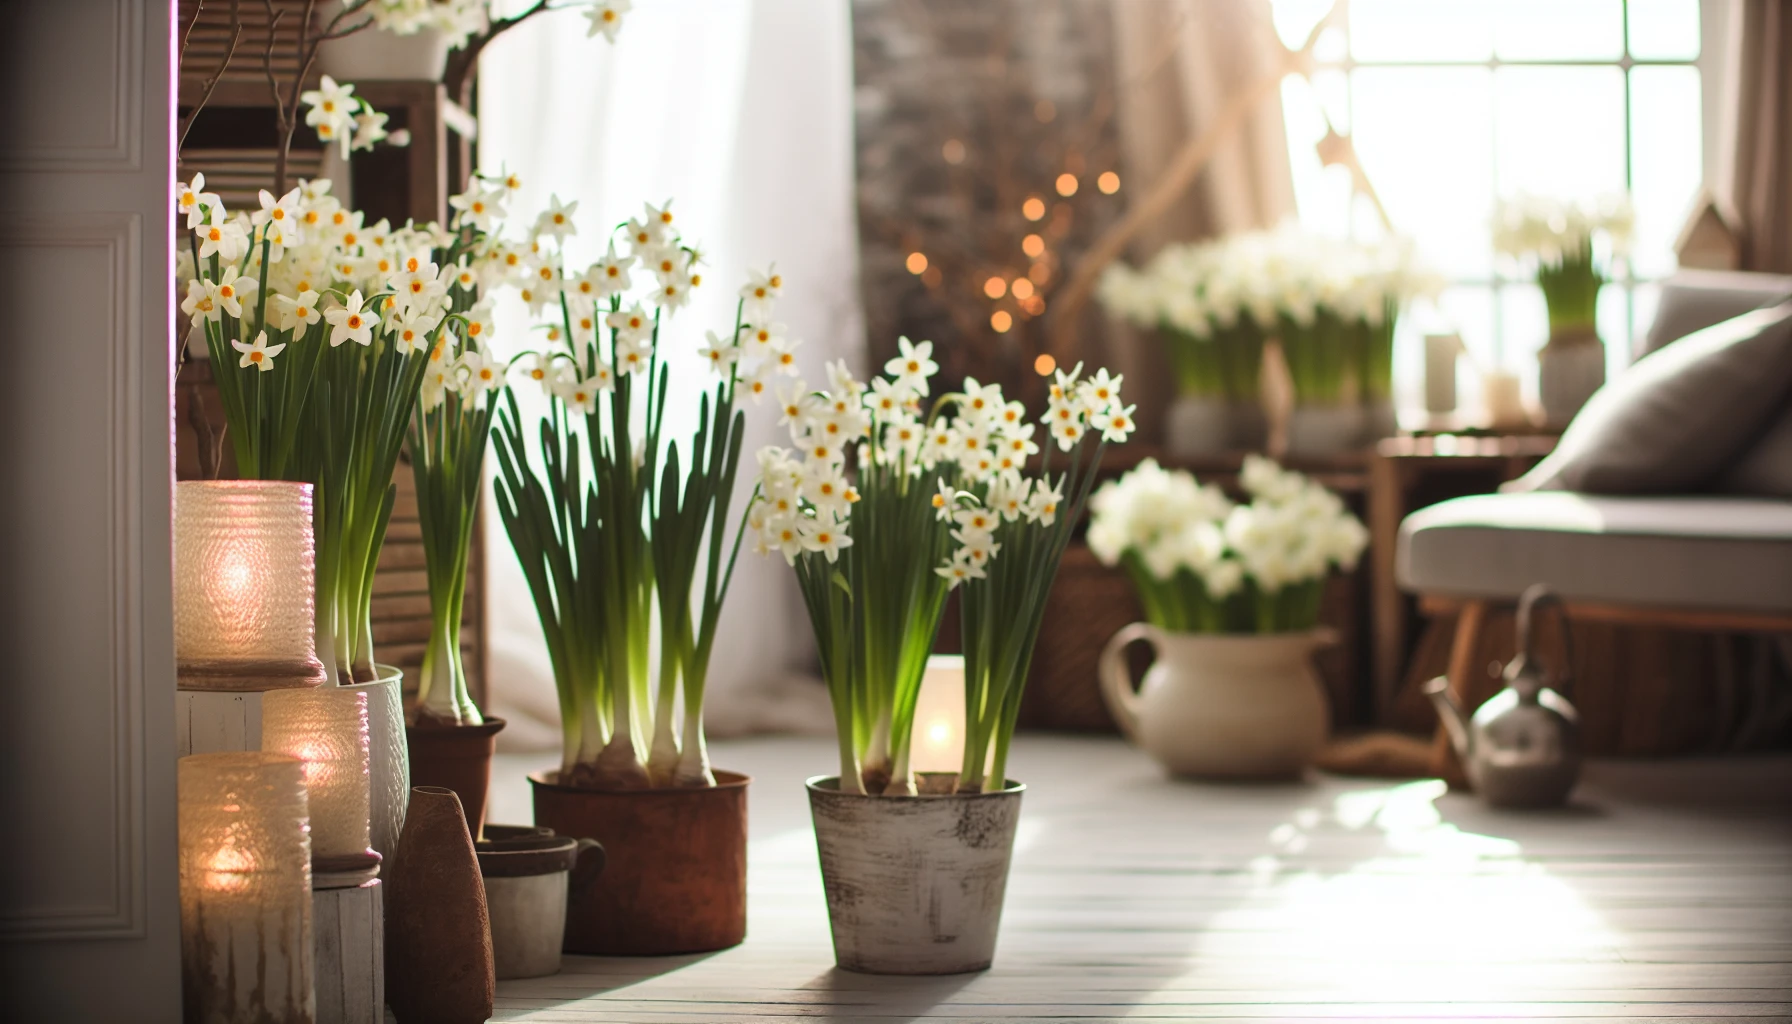 A cozy indoor setting with blooming paperwhite narcissus